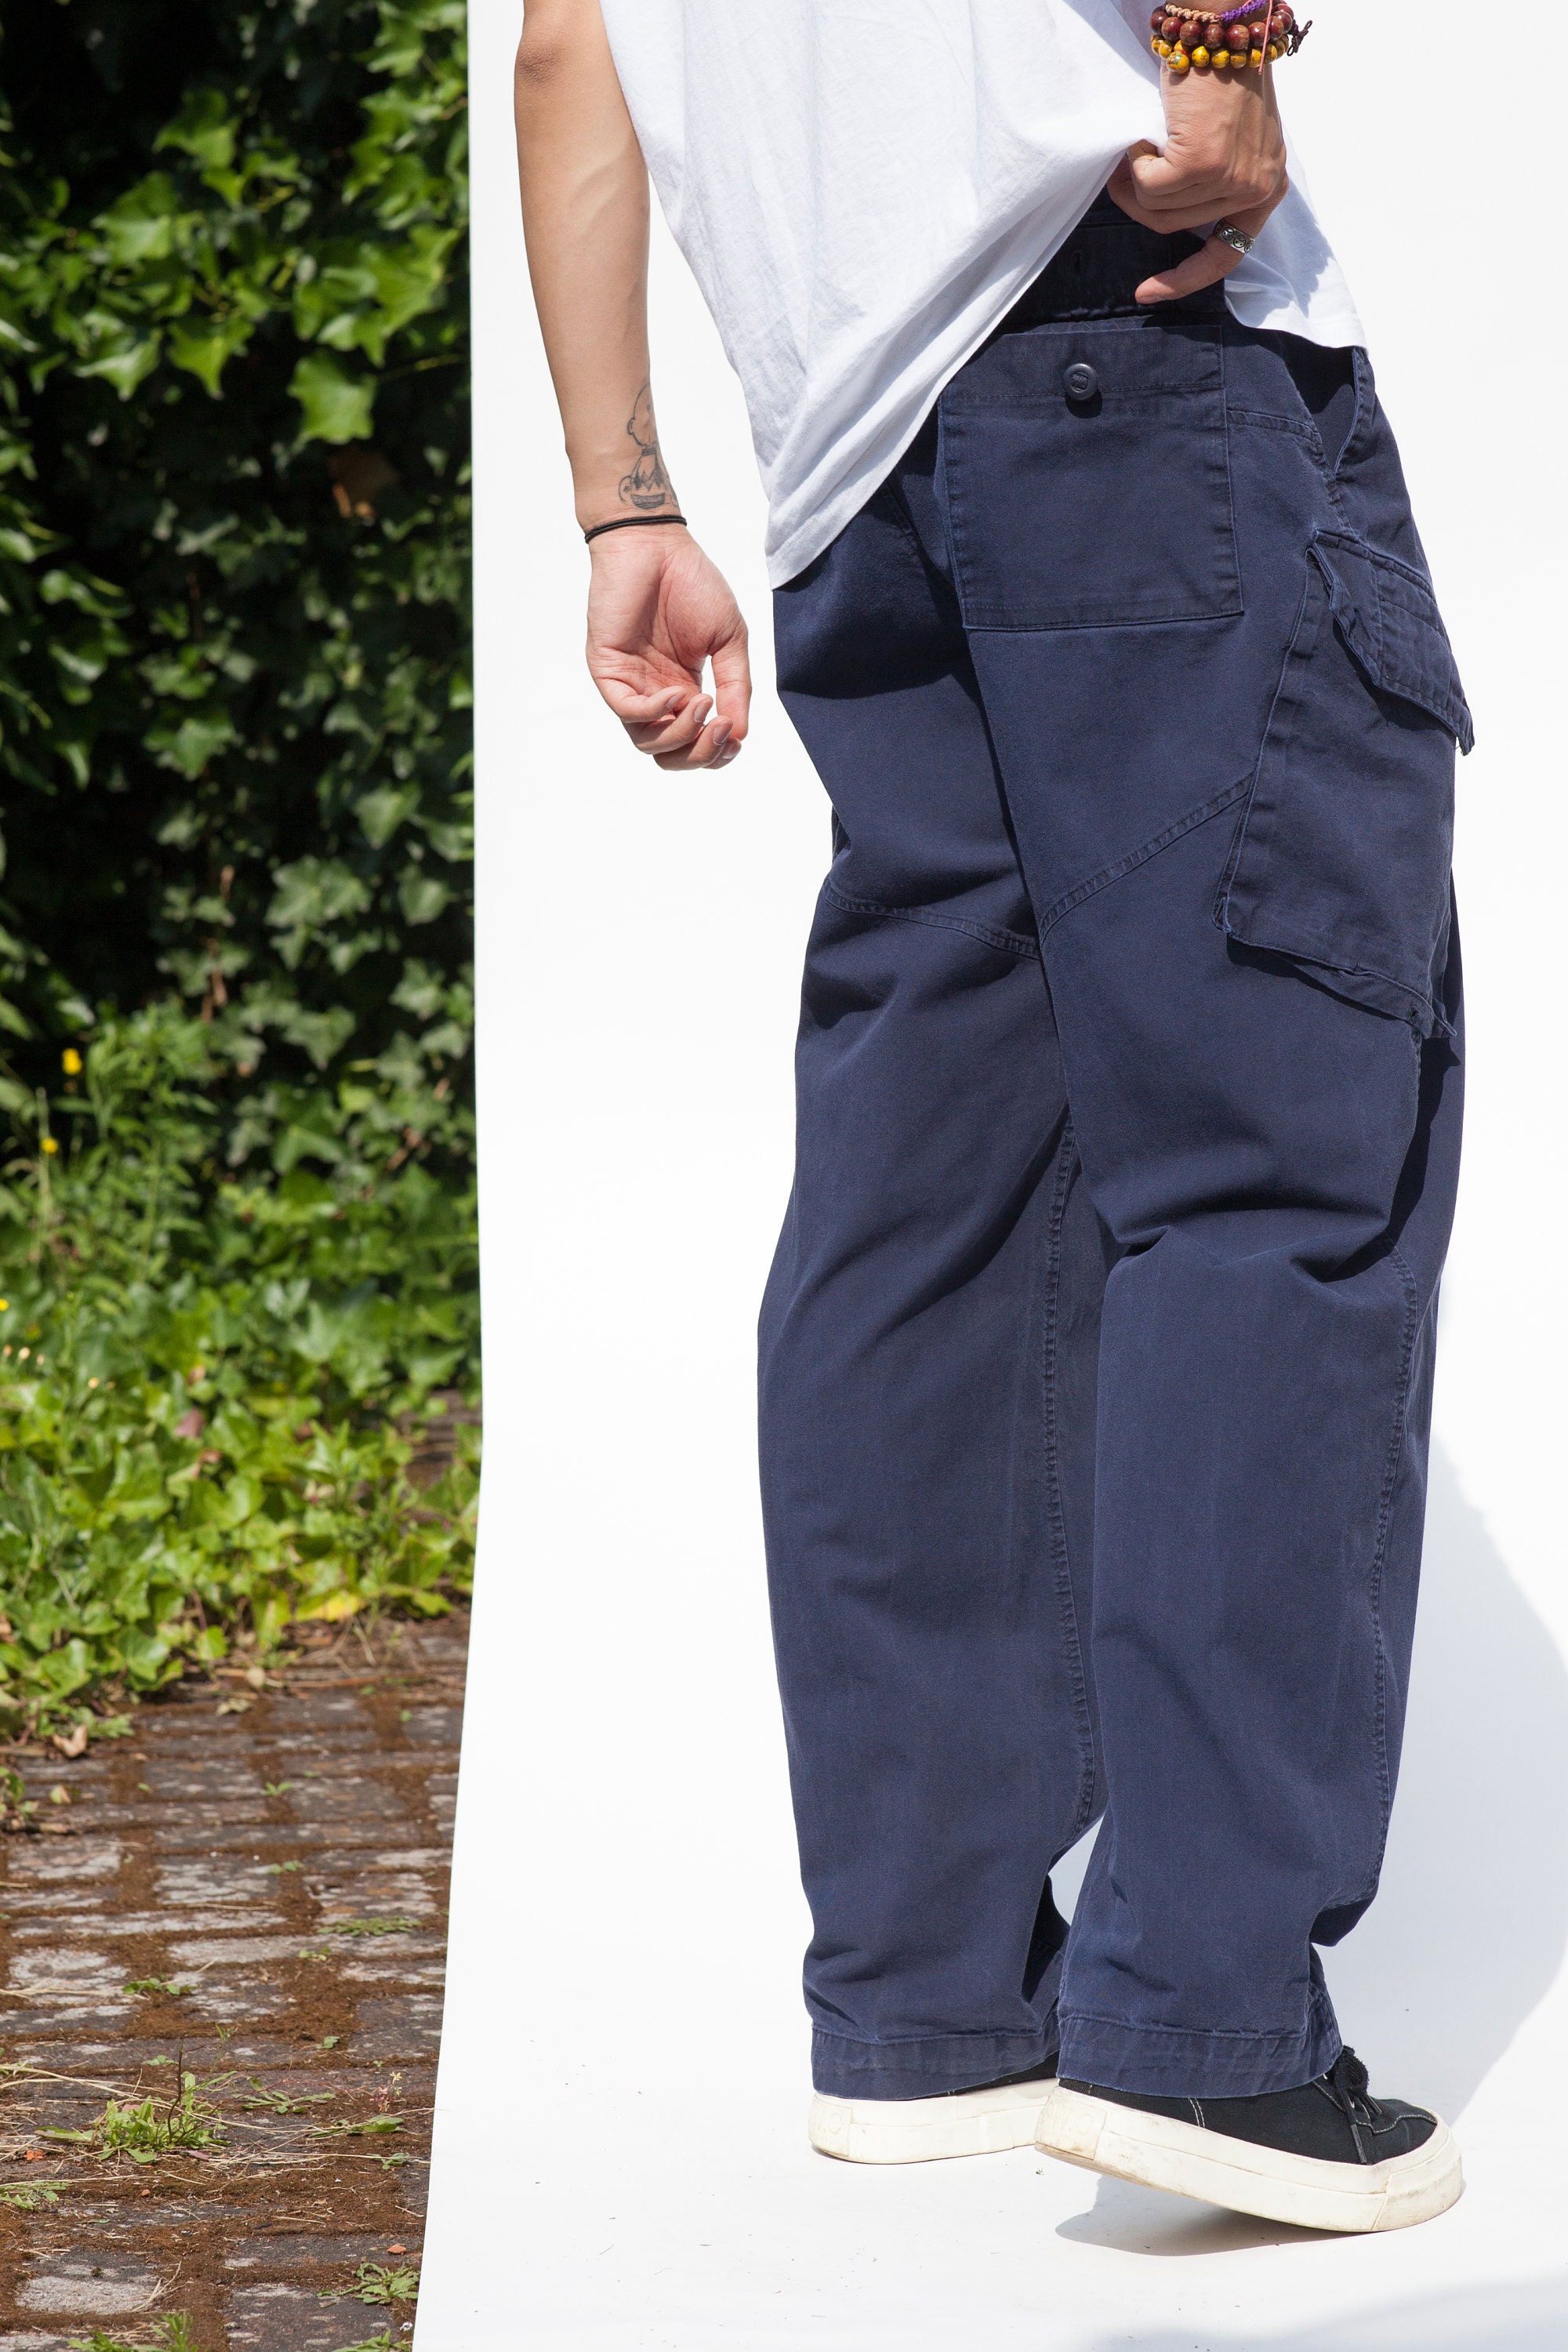 Vintage British Army Navy Issued Blue Work Combat Military Trousers Wide Leg Pants - All sizes